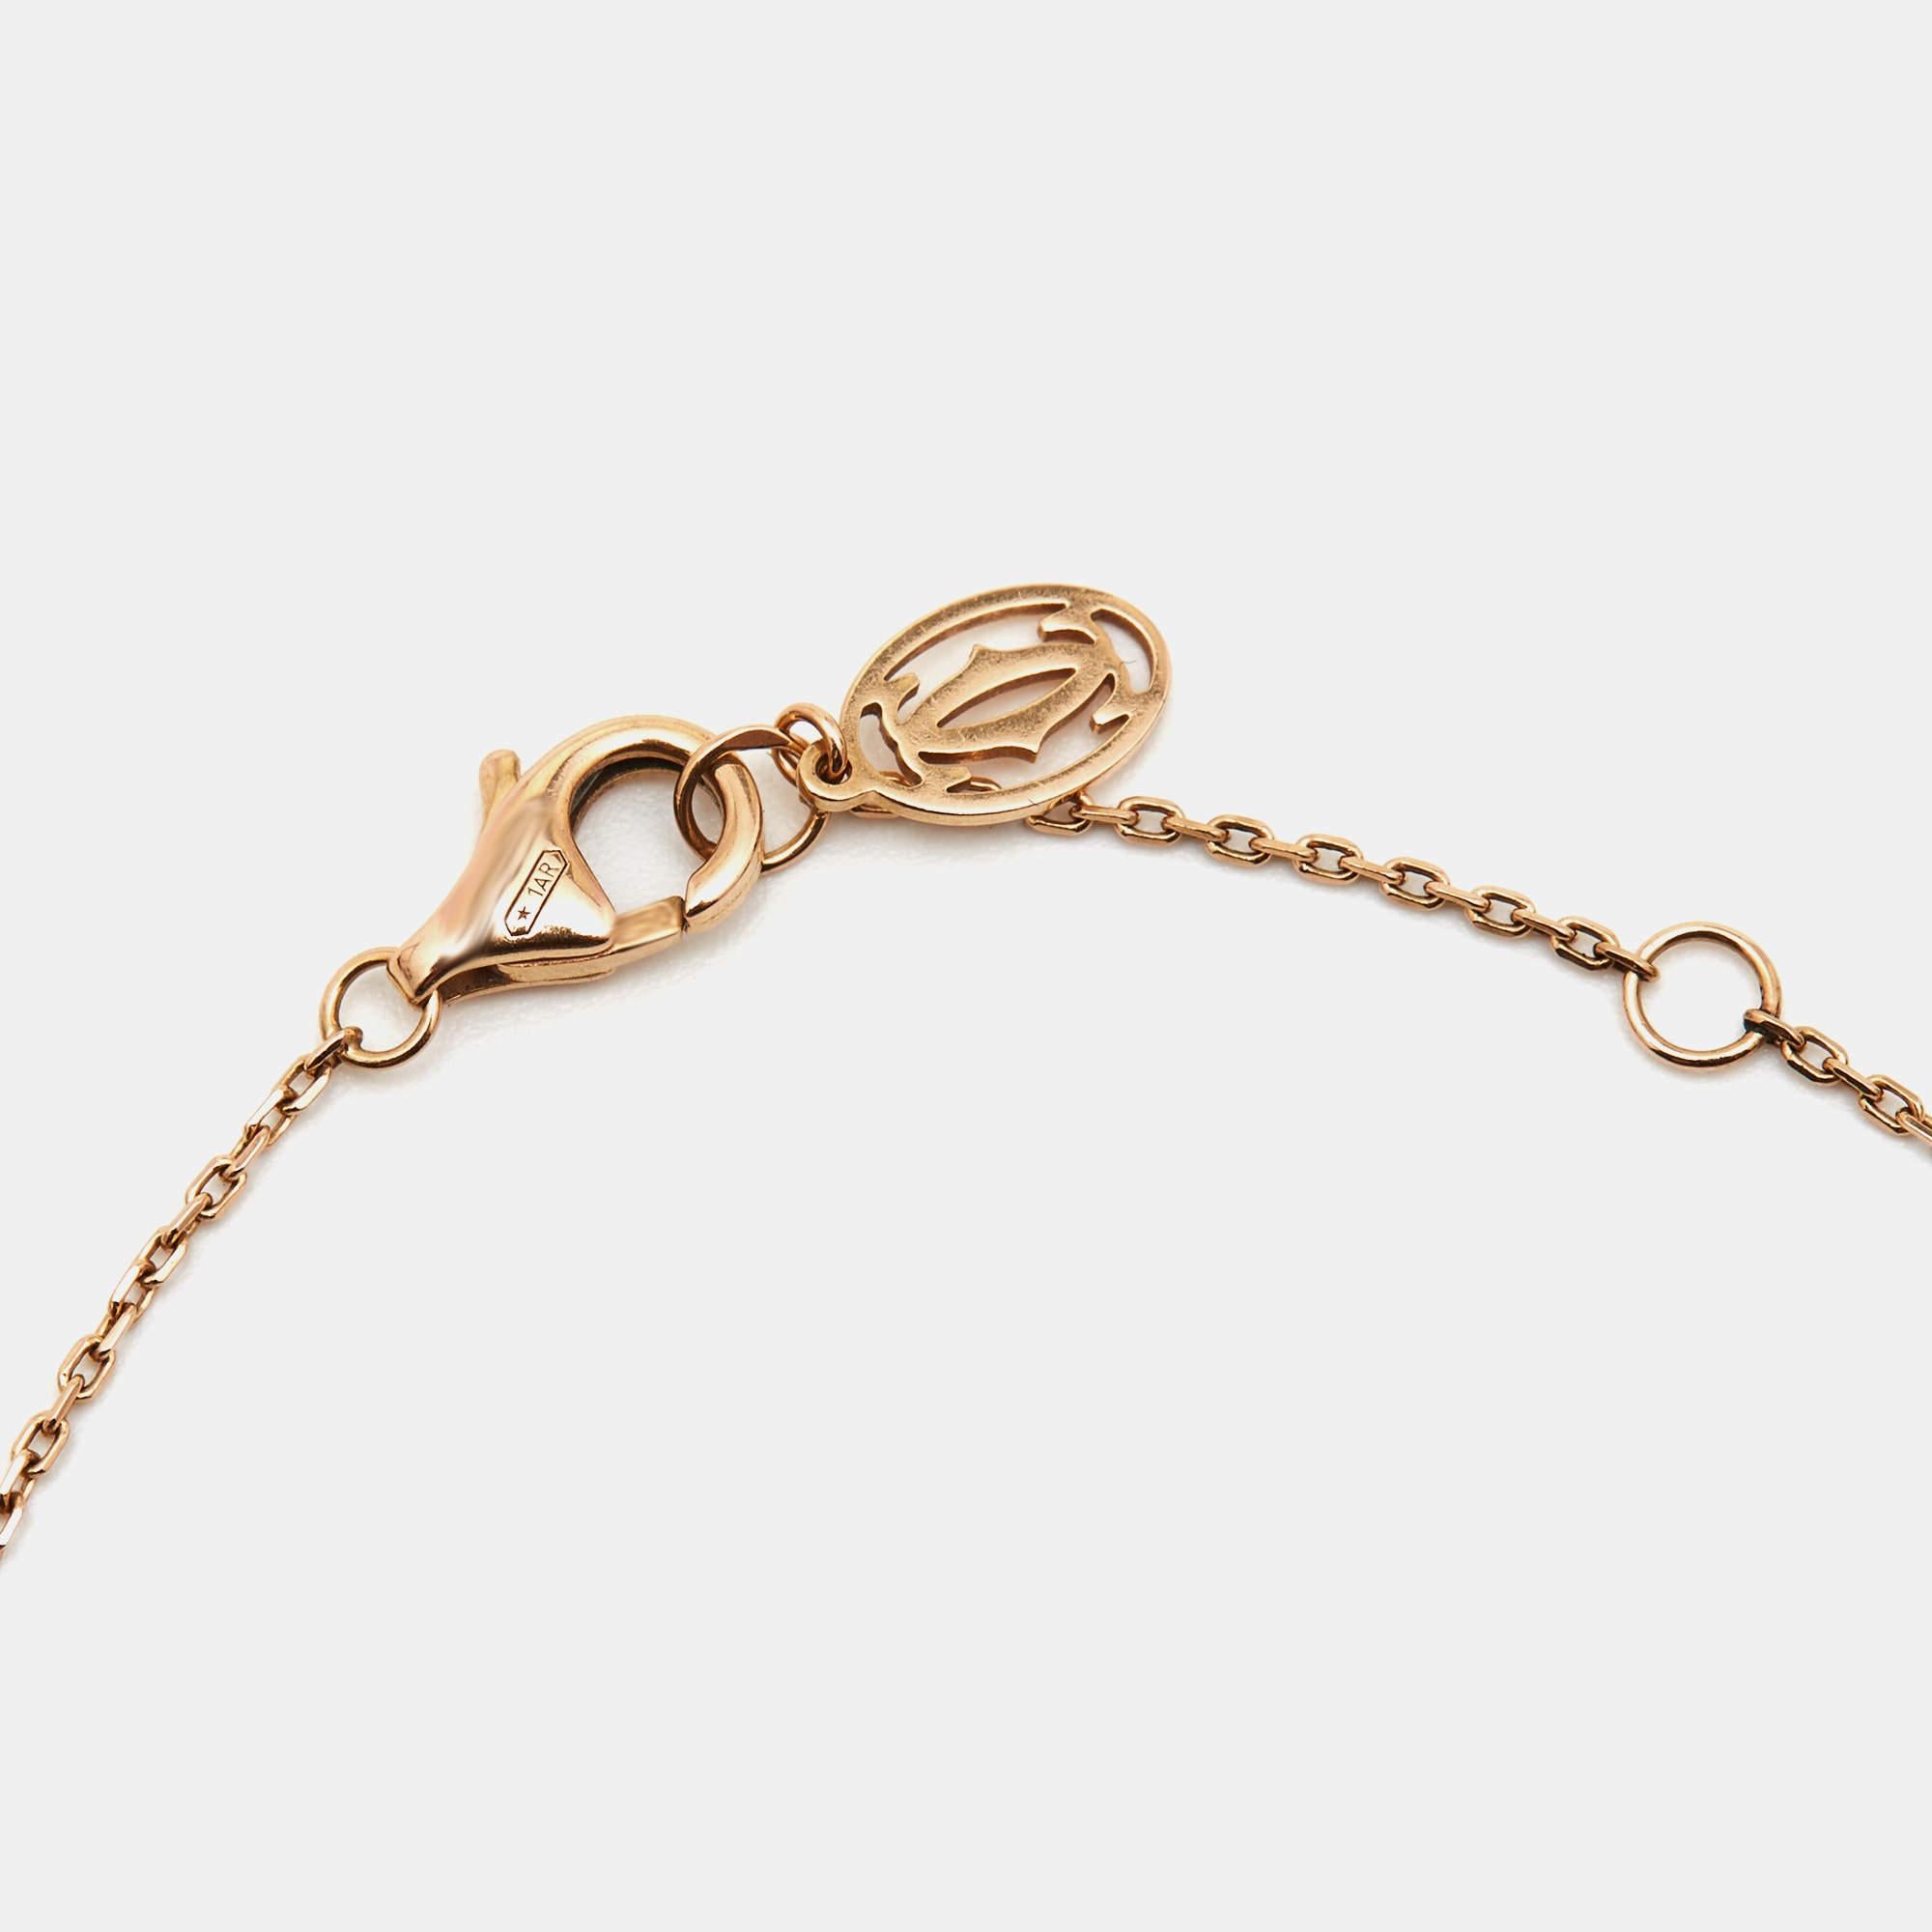 Cartier D' amour collection has pieces designed with wearability in mind to act as everyday symbols of love. From that exclusive line comes this bracelet fashioned in 18k rose gold. The delicate chain is secured by a lobster clasp and highlighted by